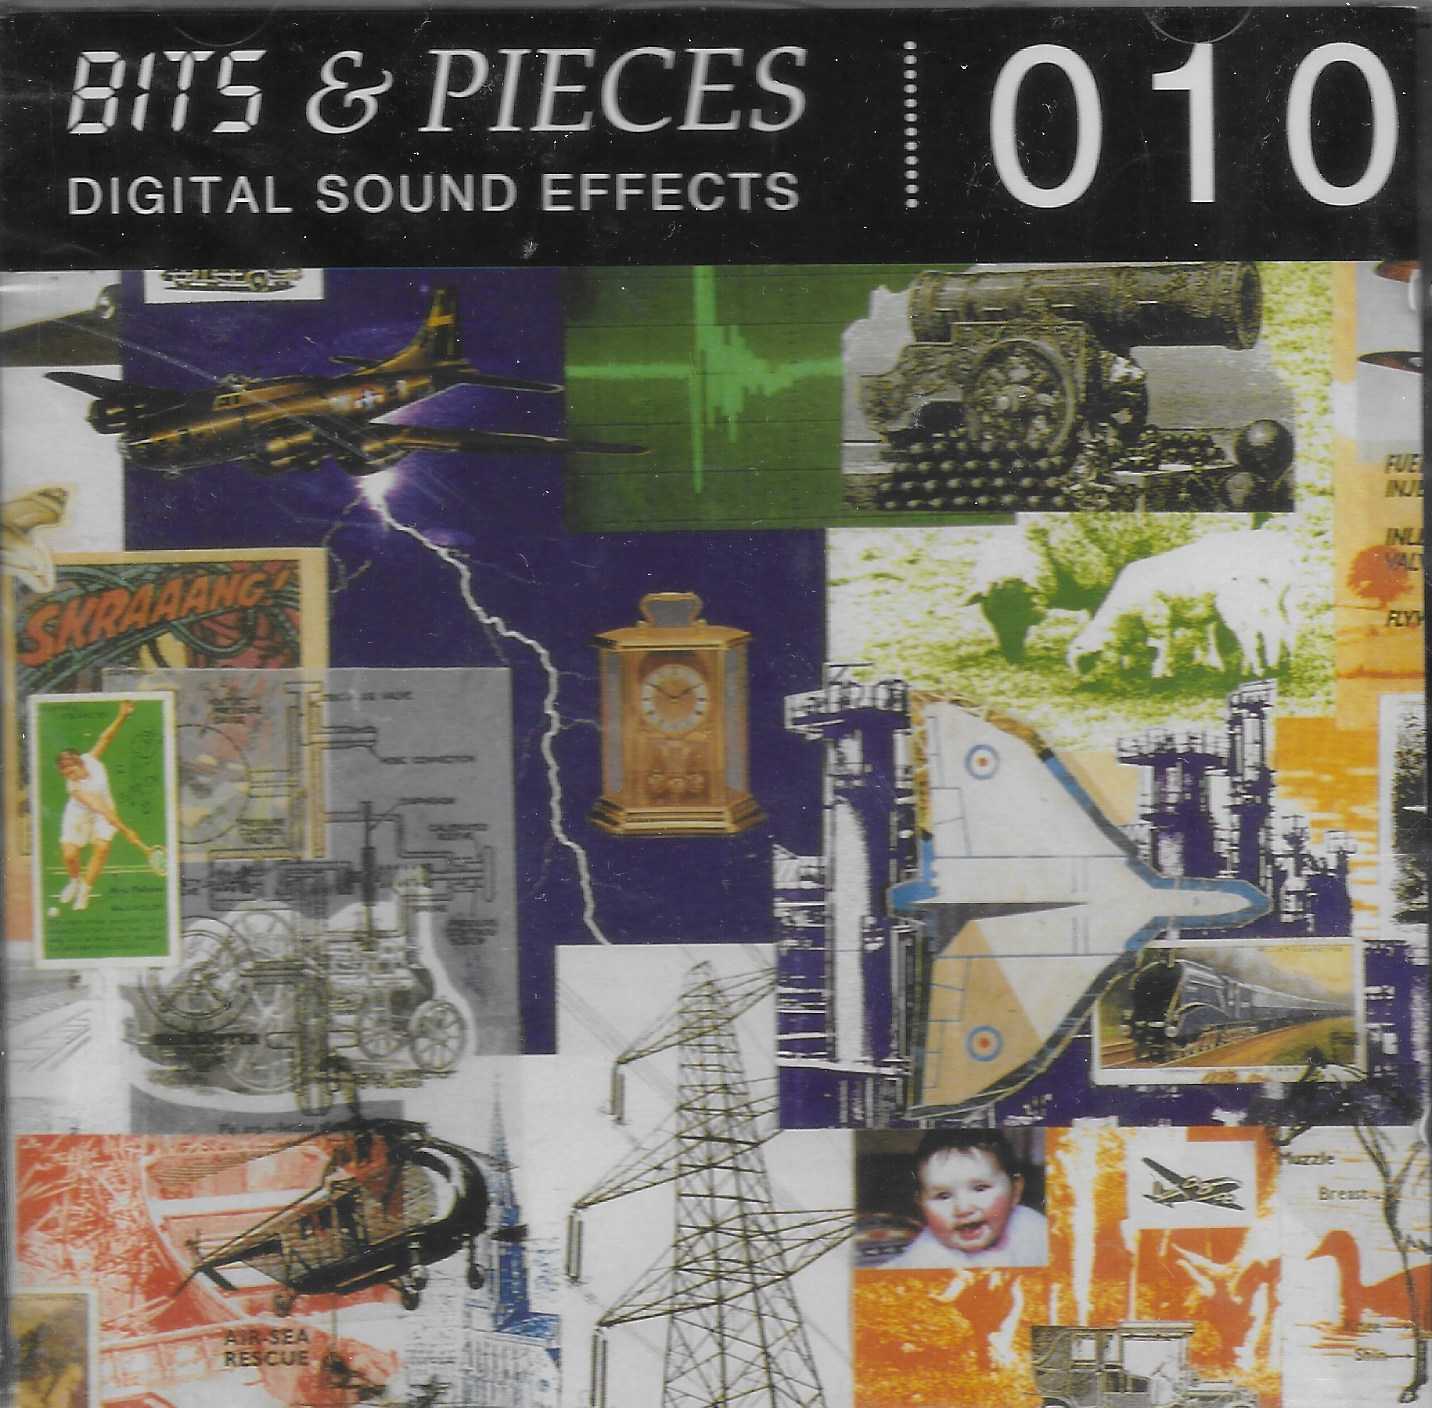 Picture of Bits & pieces digital sound effects 010 by artist Various from ITV, Channel 4 and Channel 5 cds library